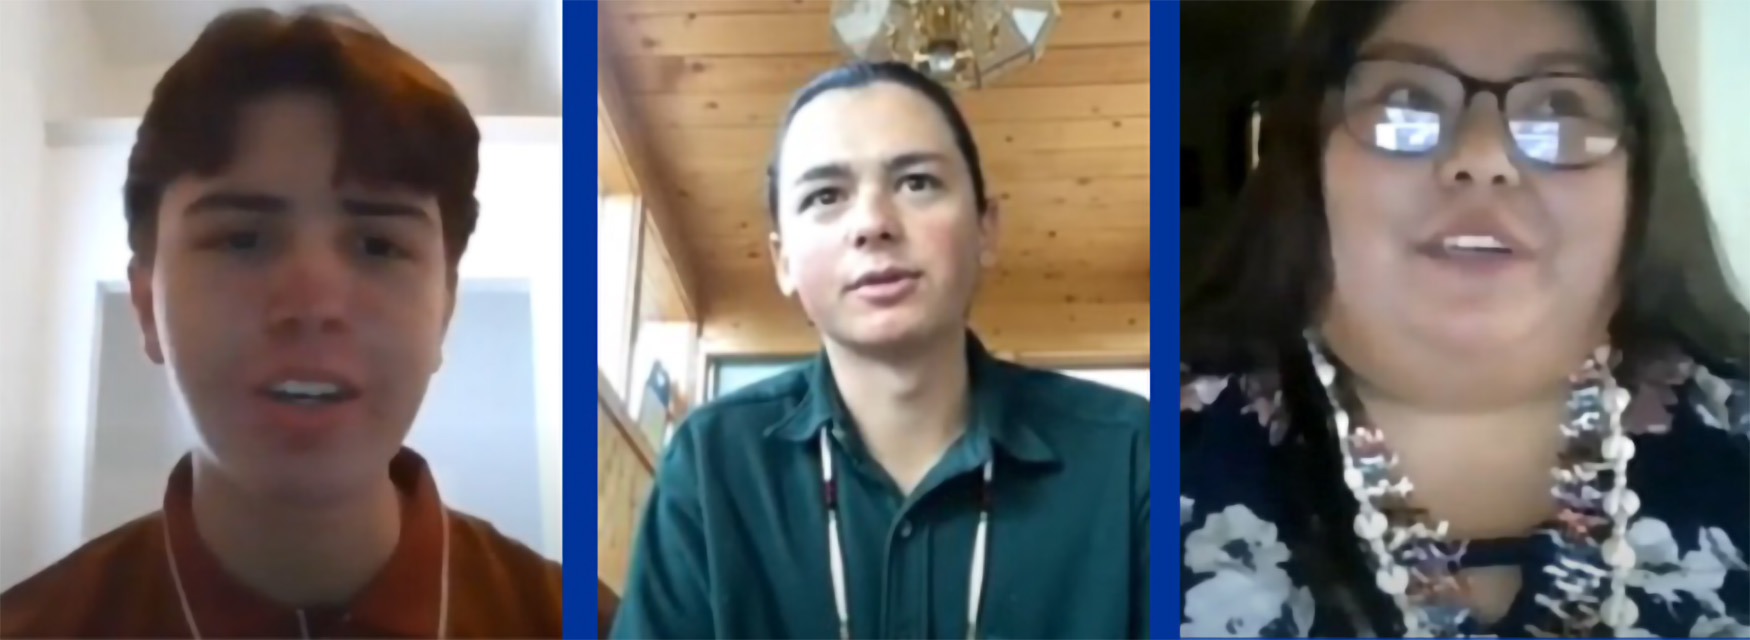 Screen shots of the youth panelists participating in the Tribal Mentoring Models and Approaches for Native Youth Wellness webinar—Shace Duncan, Sam Schimmel, and Kaitlin Martinez.